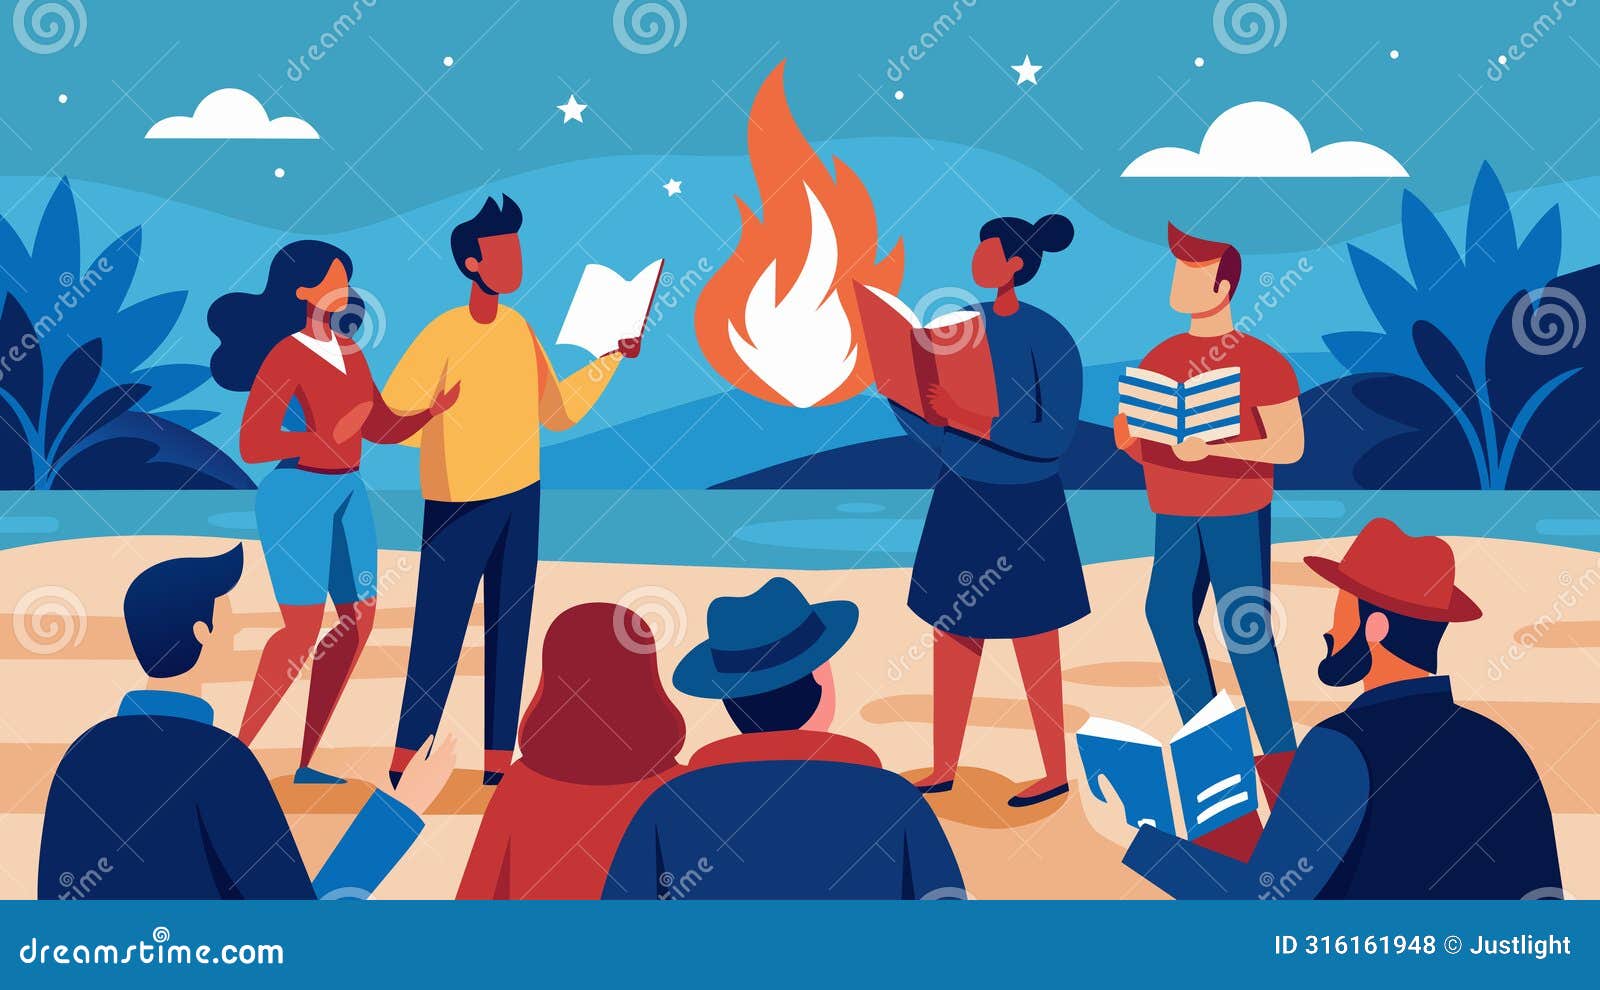 at the beach a group of friends gather around a bonfire their voices raised in unison as they read aloud patriotic poems